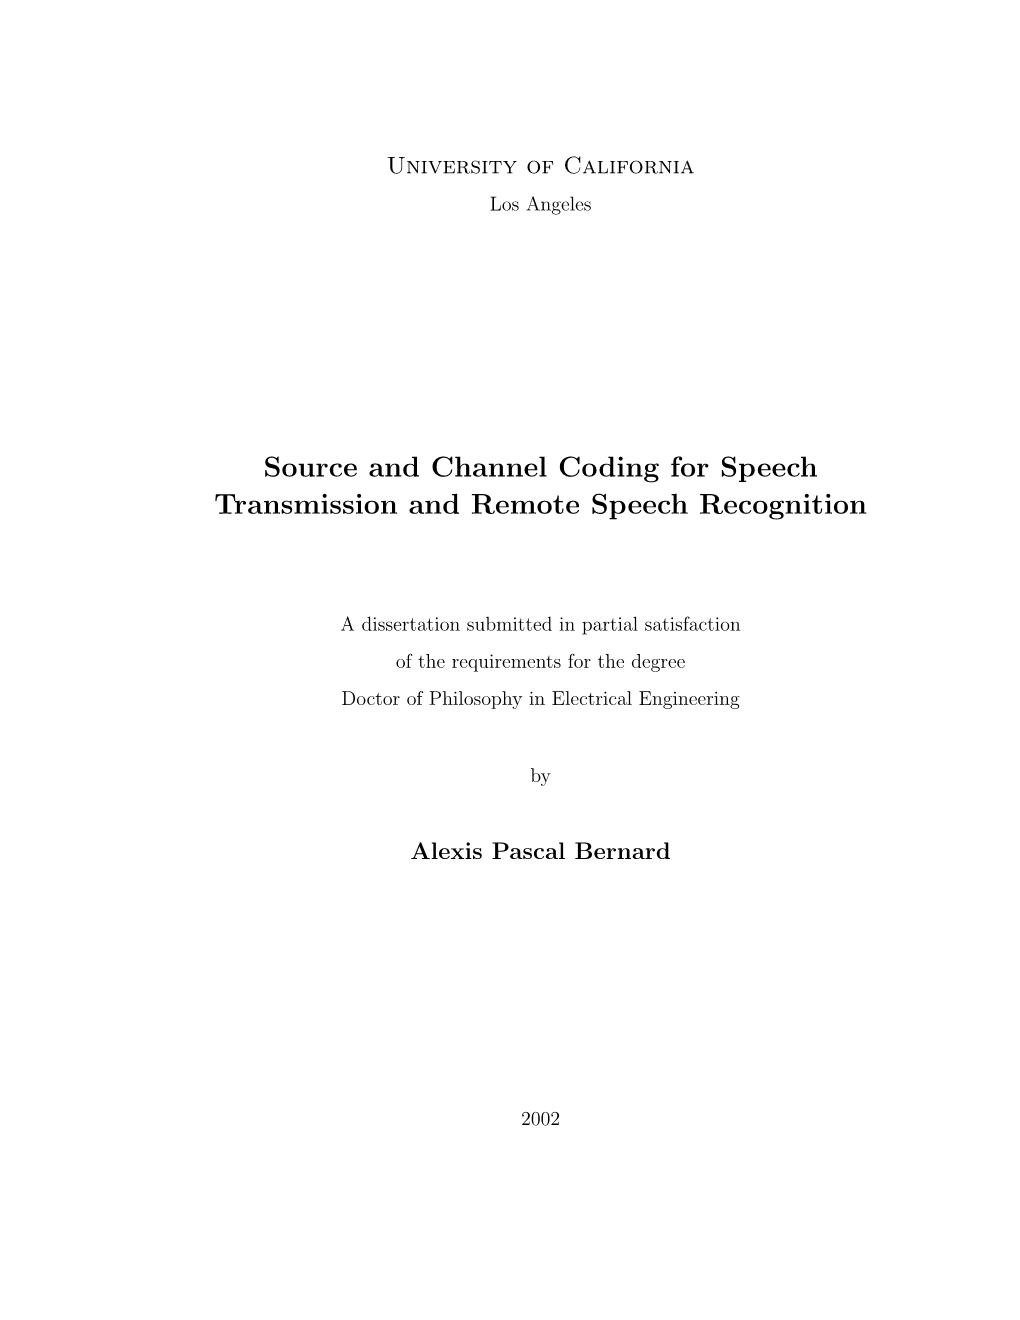 Source and Channel Coding for Speech Transmission and Remote Speech Recognition